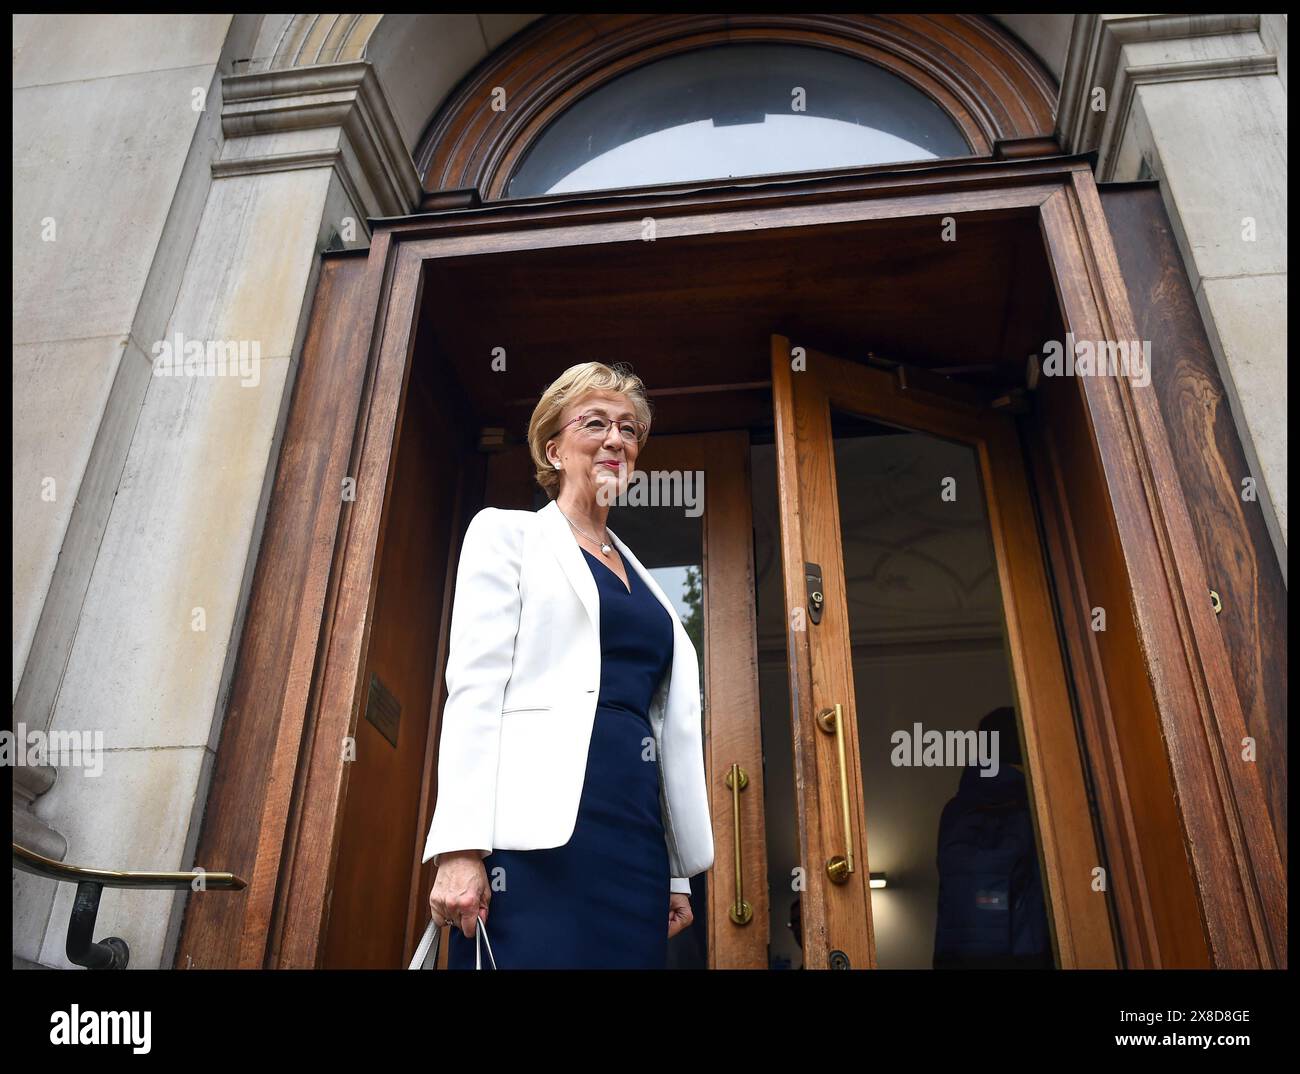 London, UK. 31st May, 2019. Image © Licensed to Parsons Media. 11/06/2019. London, United Kingdom. Andrea Leadsom Leadership Campaign Launch. Andrea Leadsom MP, Leader of the House of Commons and Conservative Party leadership candidate speaks attends her campaign launch at the Institute of Mechanical Engineers in London. Picture by Pete Maclaine/Parsons Media Credit: andrew parsons/Alamy Live News Stock Photo